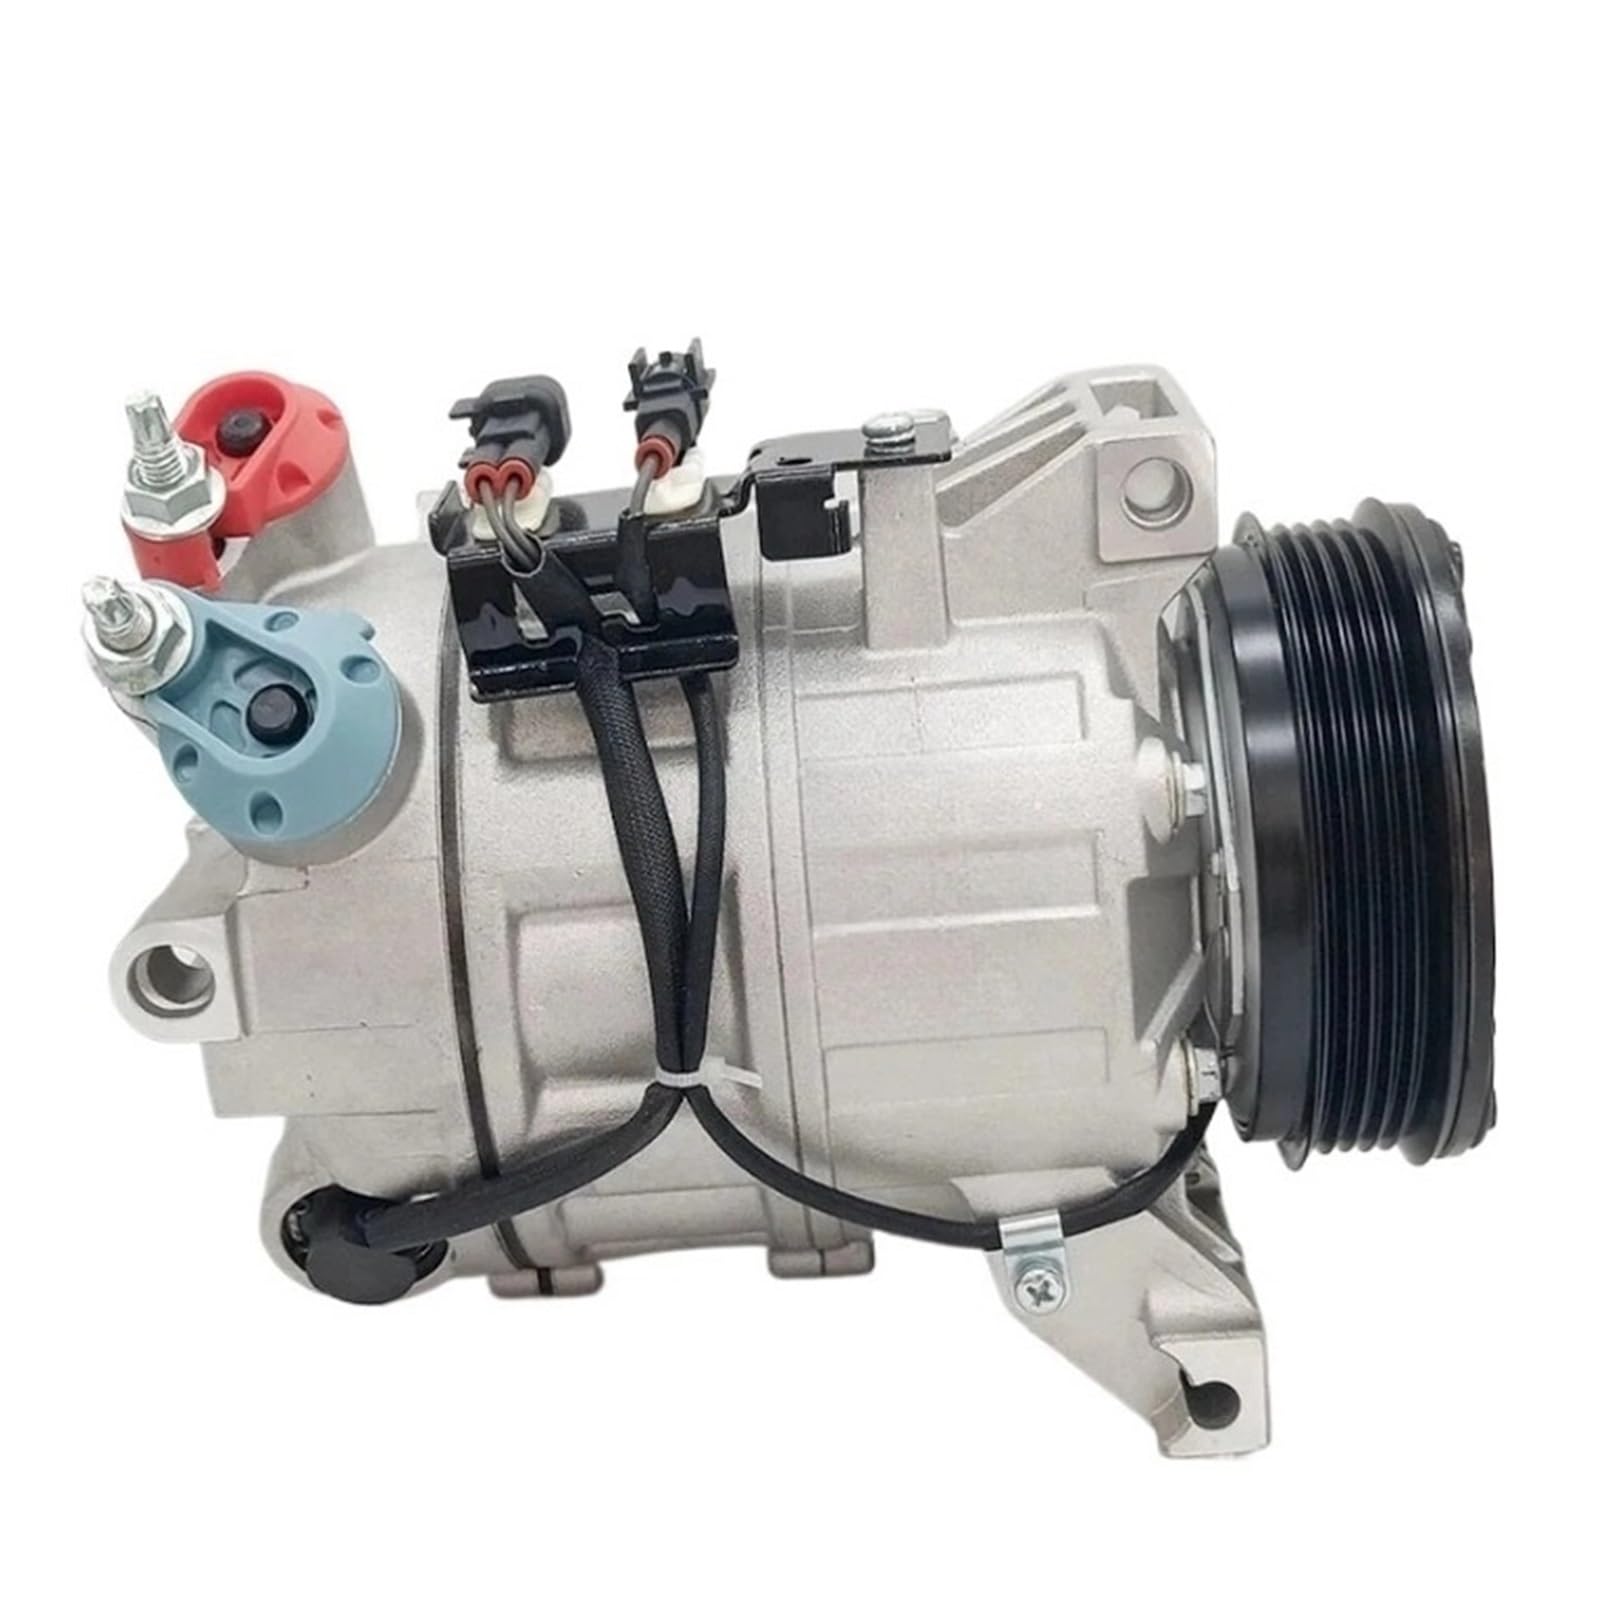 CAR AC Air Conditioning Compressor, Compatible With Volvo S60 XC60 S80 V70 XC70 SUV 36051063 P30630921 30630921 30676562 30750459 30767079 von ACSGASCA